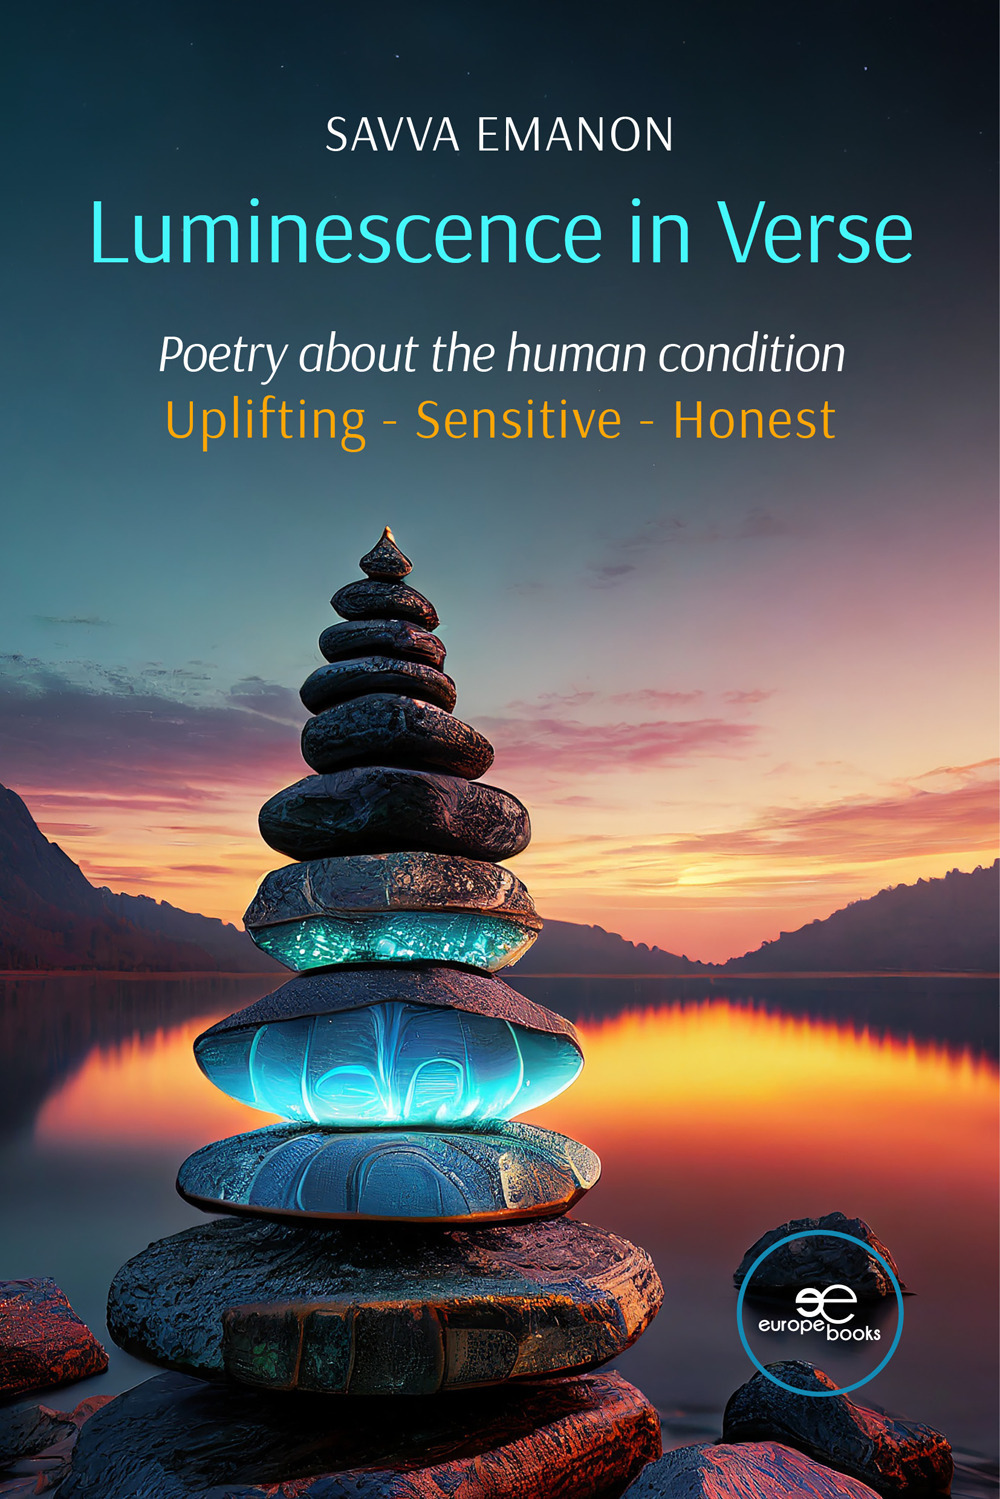 Luminescence in verse. Poetry about the human condition. Uplifting, sensitive, honest